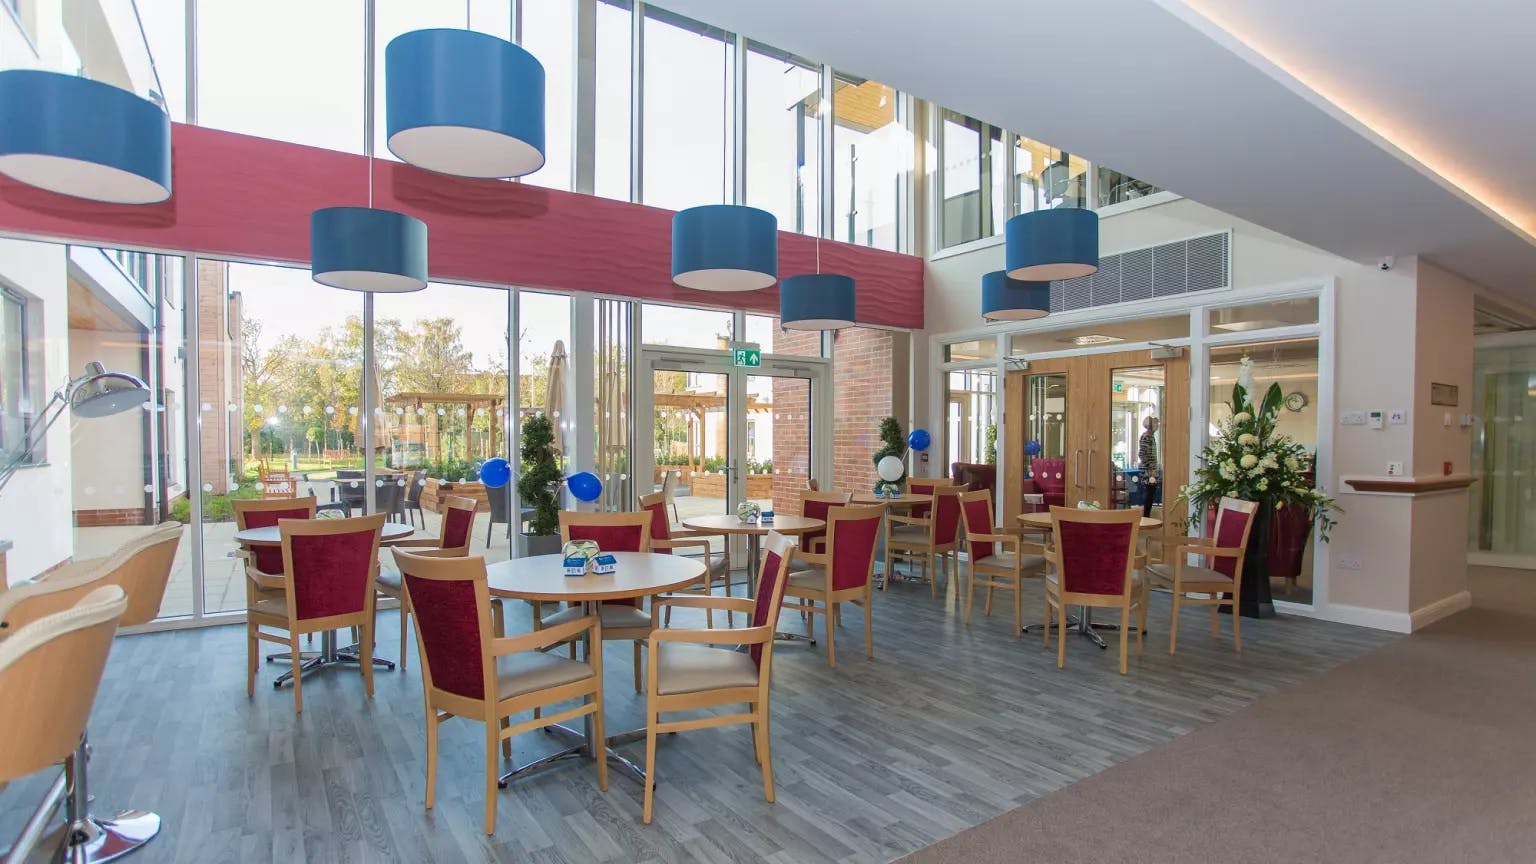 Dining area of Anson Court care home in Welwyn Garden City, Hertfordshire